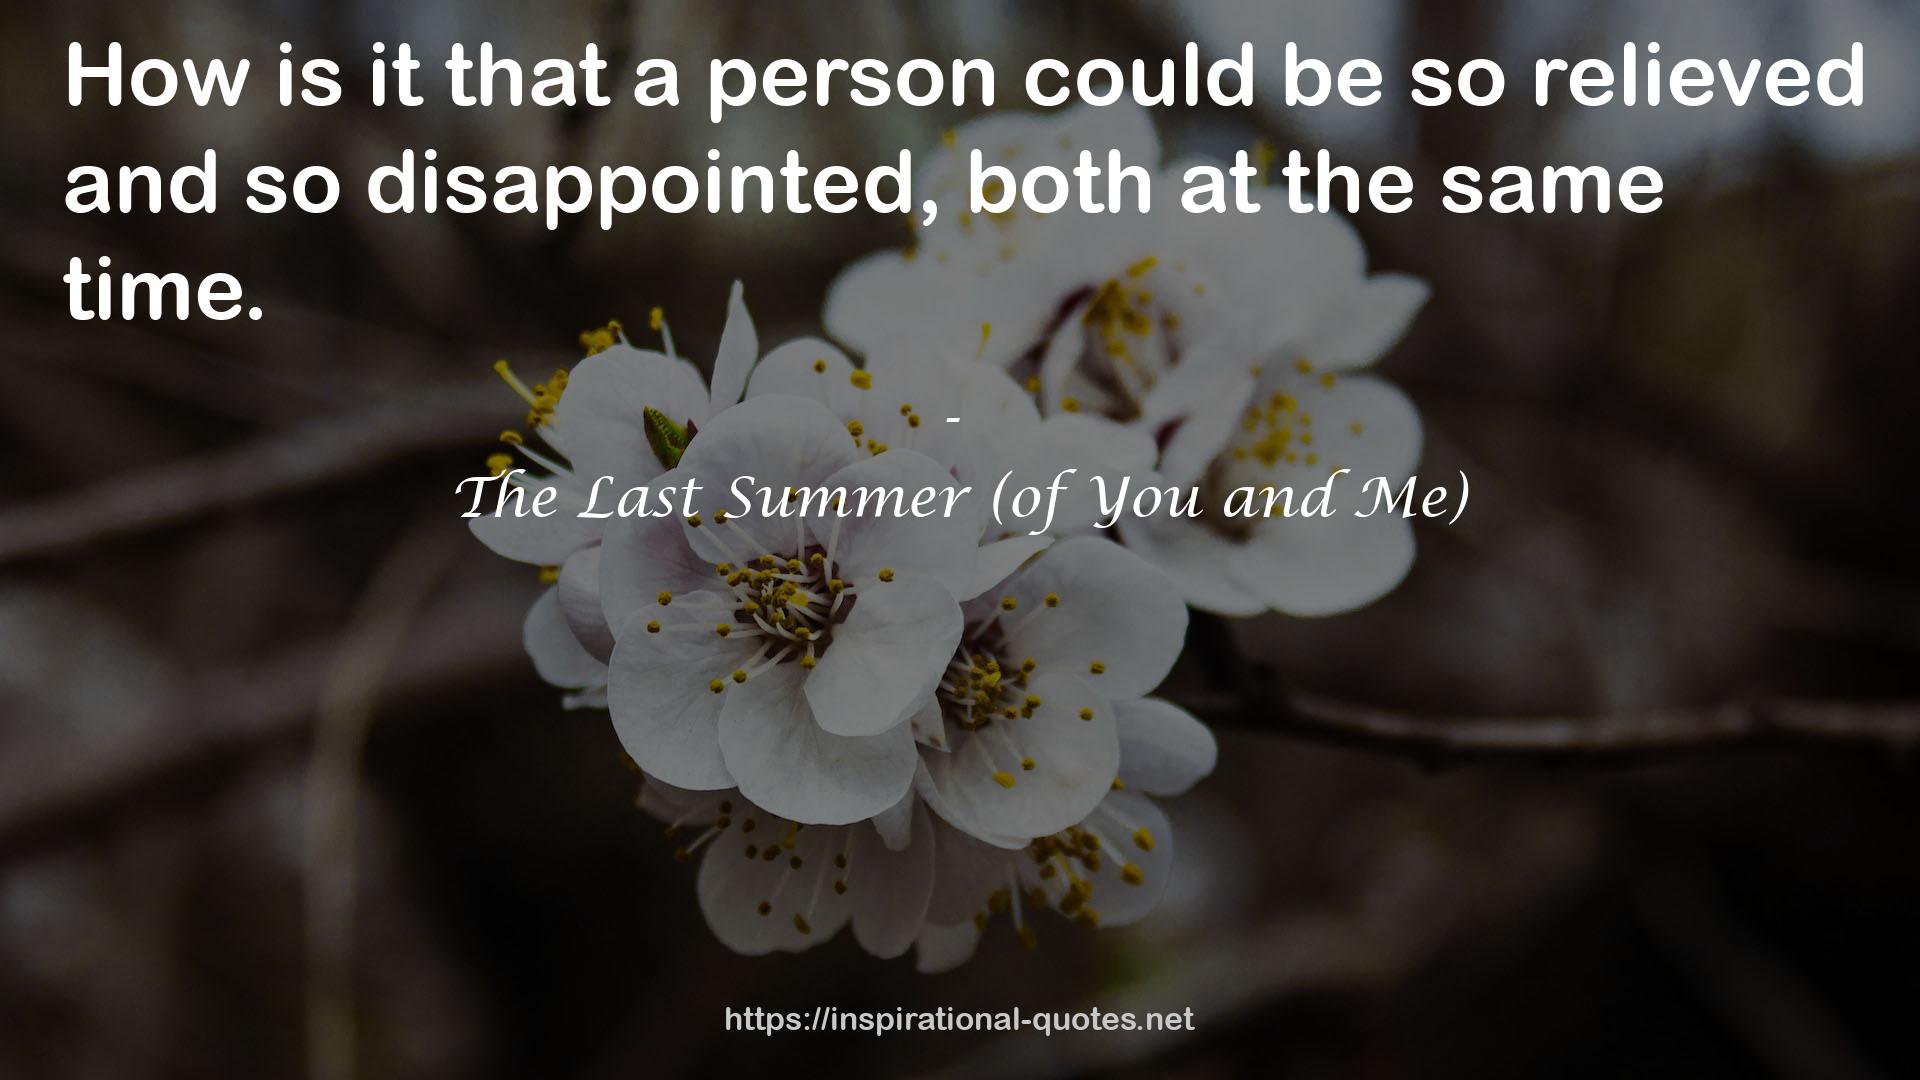 The Last Summer (of You and Me) QUOTES